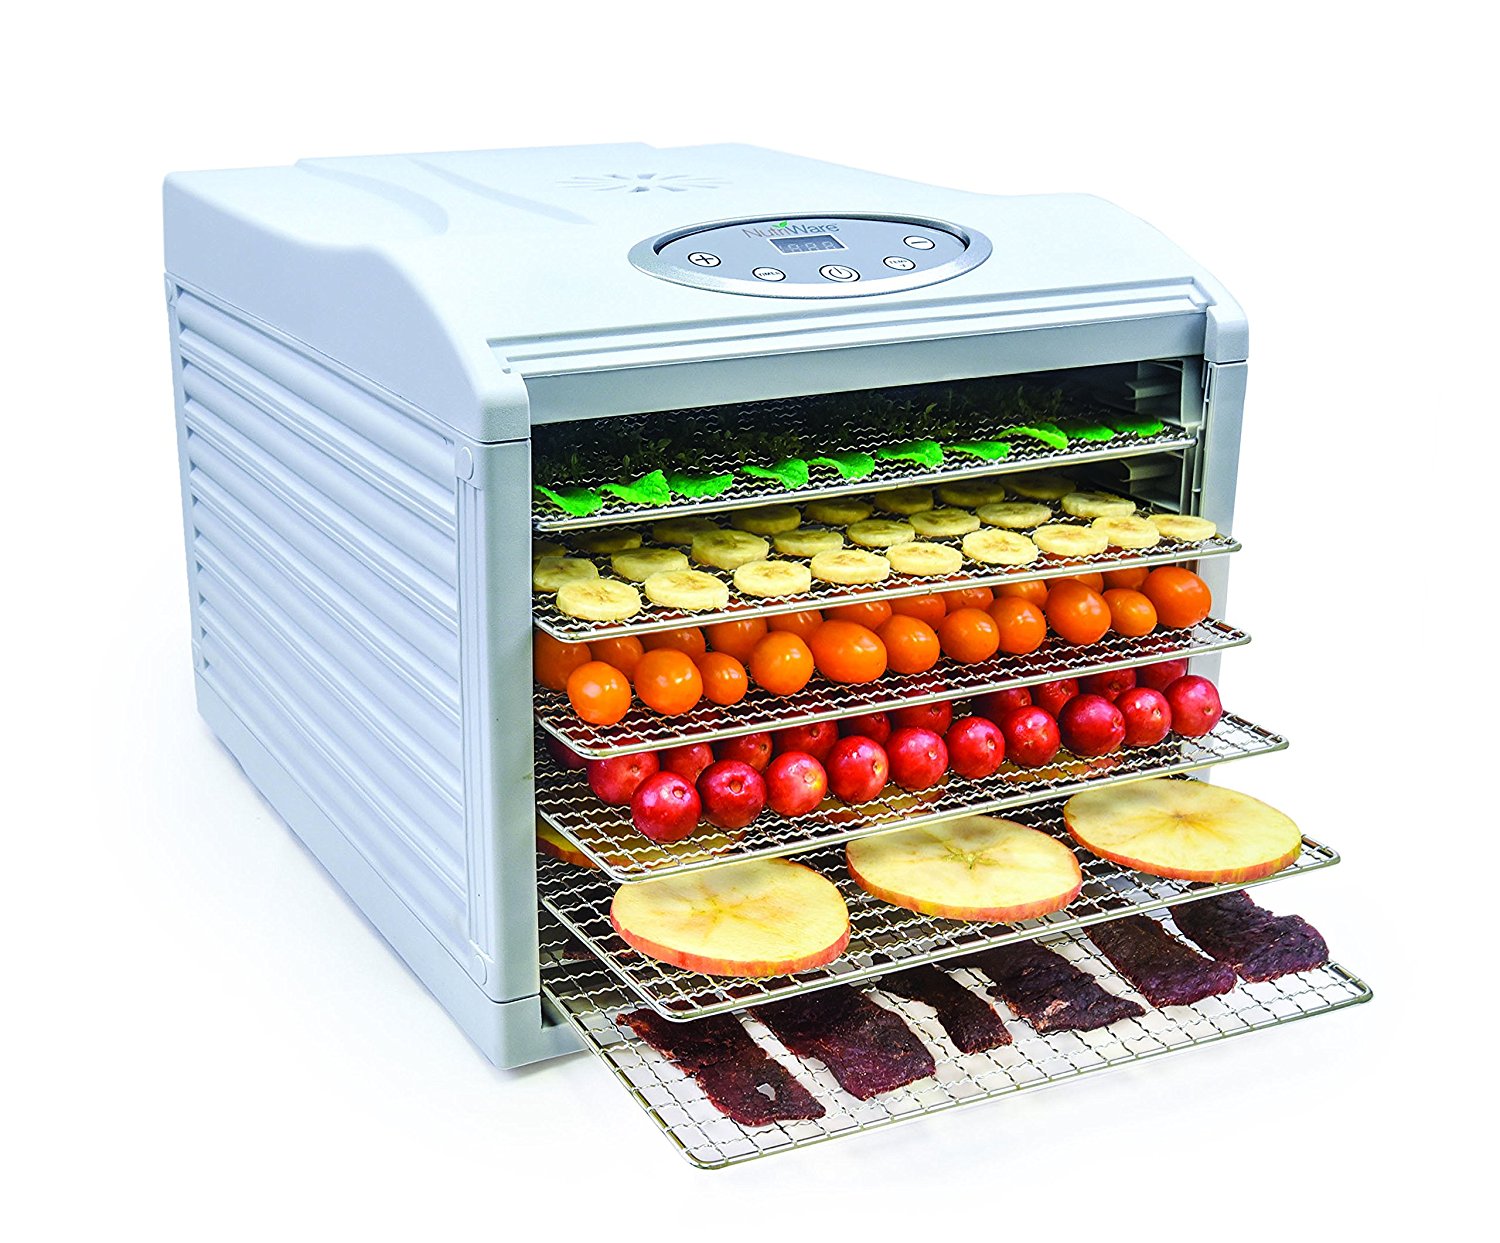 https://www.plantbasedpros.com/wp-content/uploads/2018/01/Aroma-NutriWare-Digital-Control-6-Tray-Food-Dehydrator-with-Stainless-Steel-Trays-2.jpg